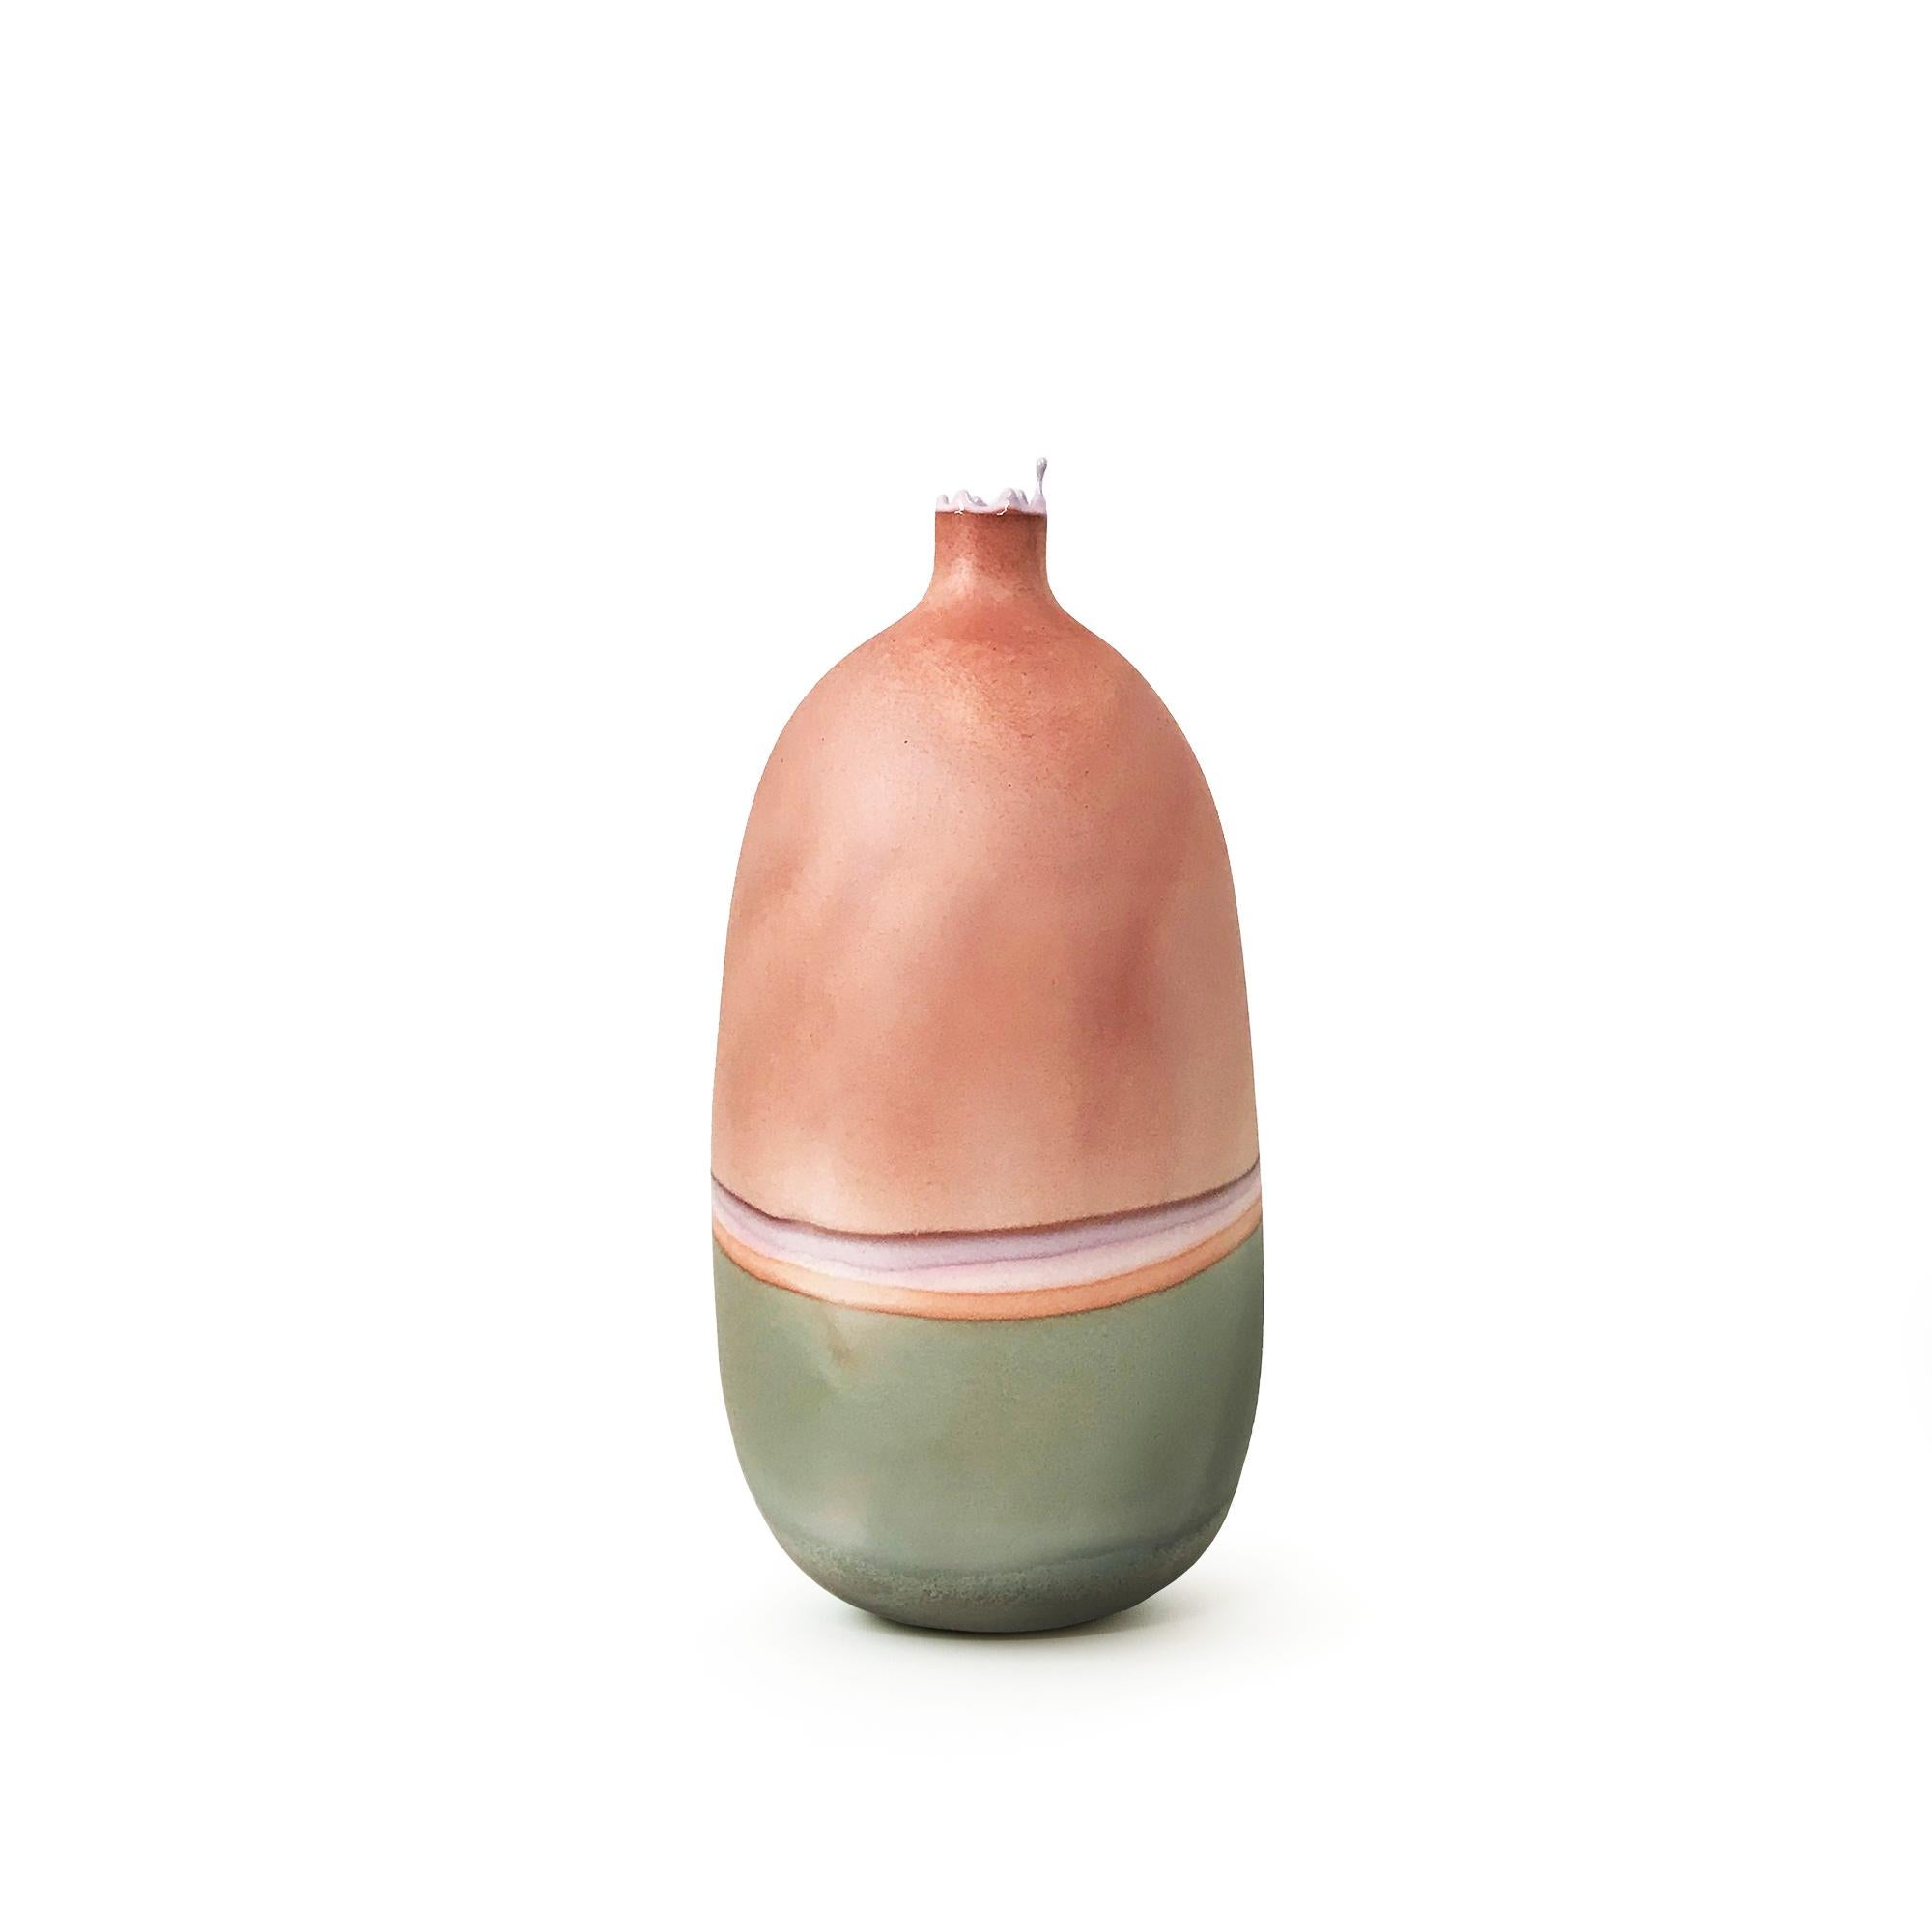 Peach coral patina mercury vase by Elyse Graham
Dimensions: W 14 x D 14 x H 25.5cm
Materials: Plaster, Resin
MOLDED, DYED, AND FINISHED BY HAND IN LA. CUSTOMIZATION
AVAILABLE.
ALL PIECES ARE MADE TO ORDER

This collection of vessels is